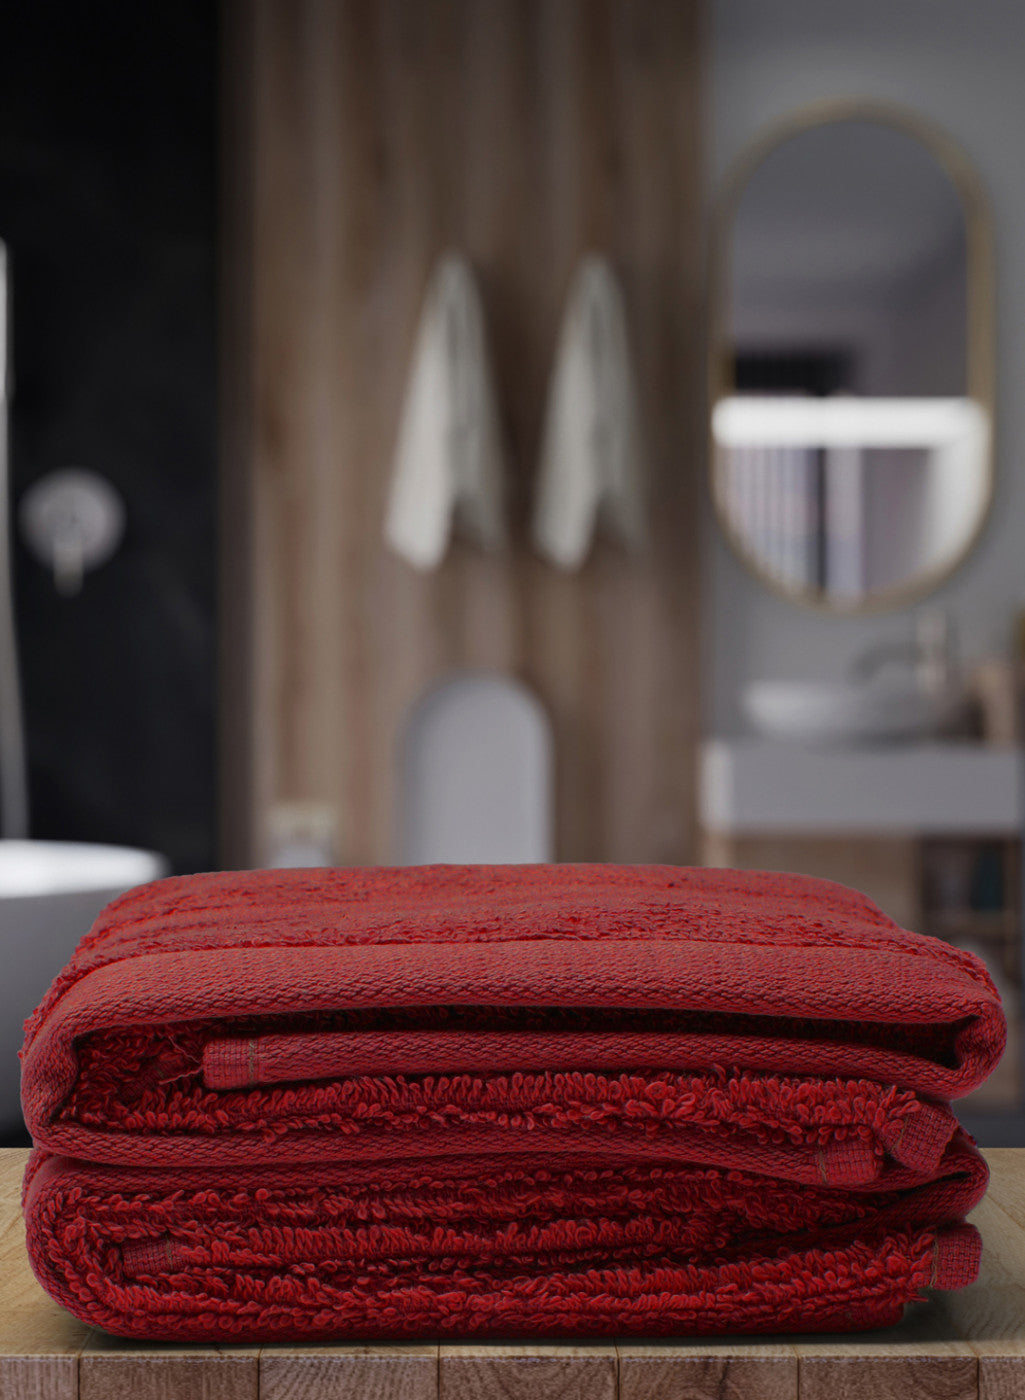 Maroon Cotton 525 GSM Hand Towels (Pack of 2)